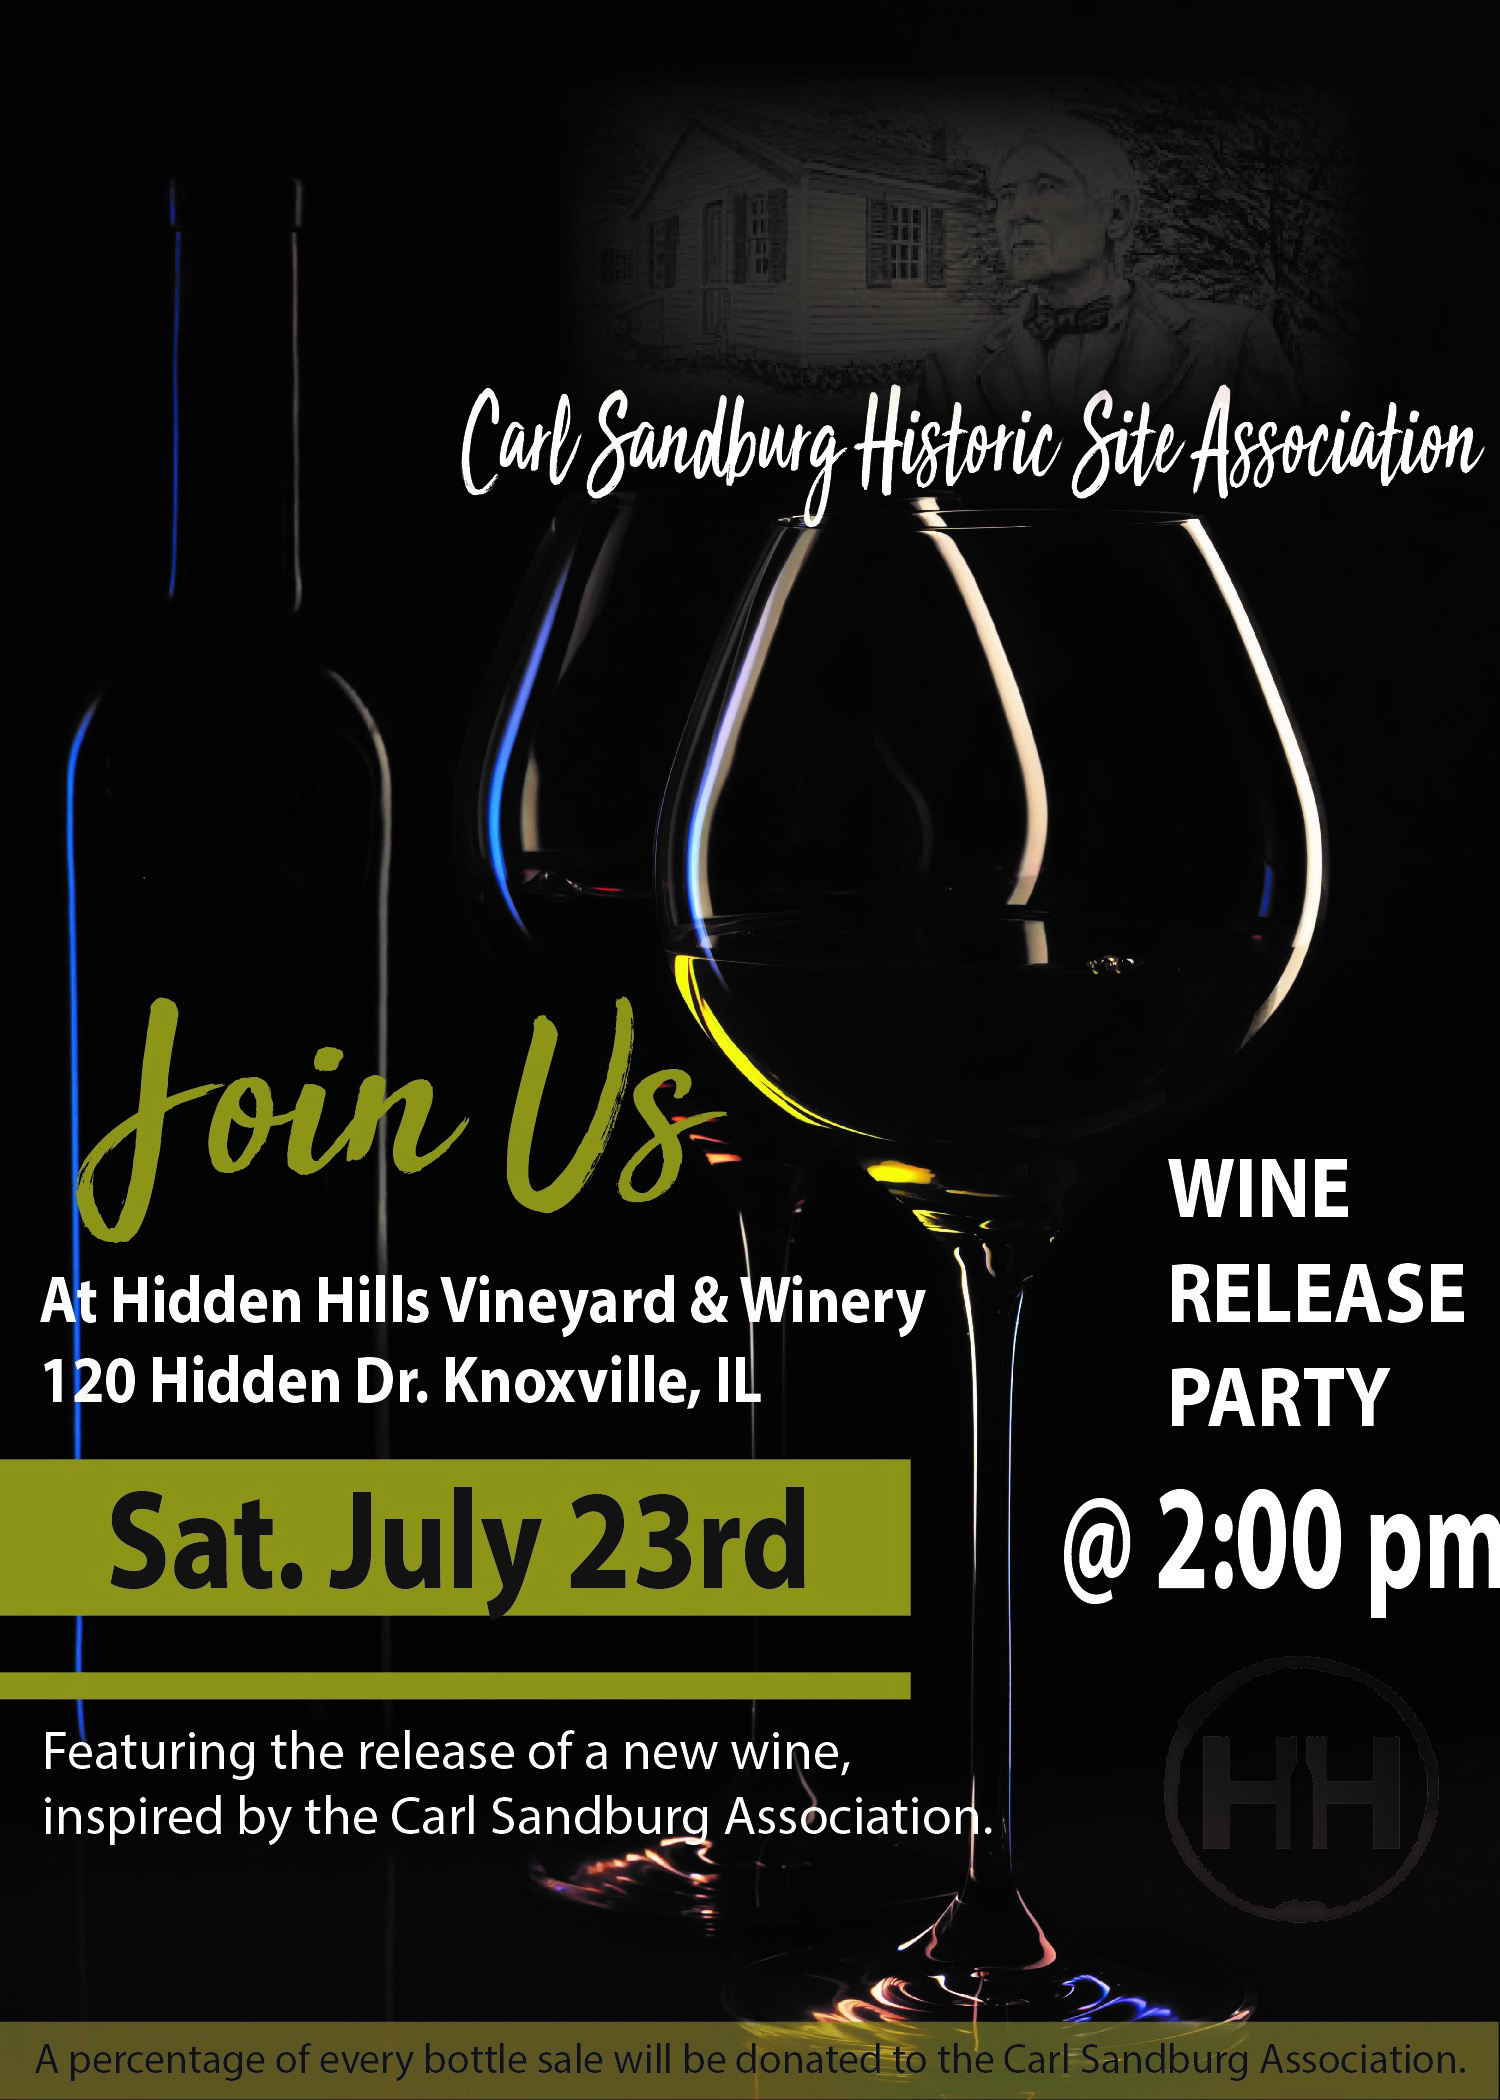 July 23, 2022, 2pm - New "Sandburg" Wine Release Party - Hidden Hills Vineyard & Winery - Knoxville, IL